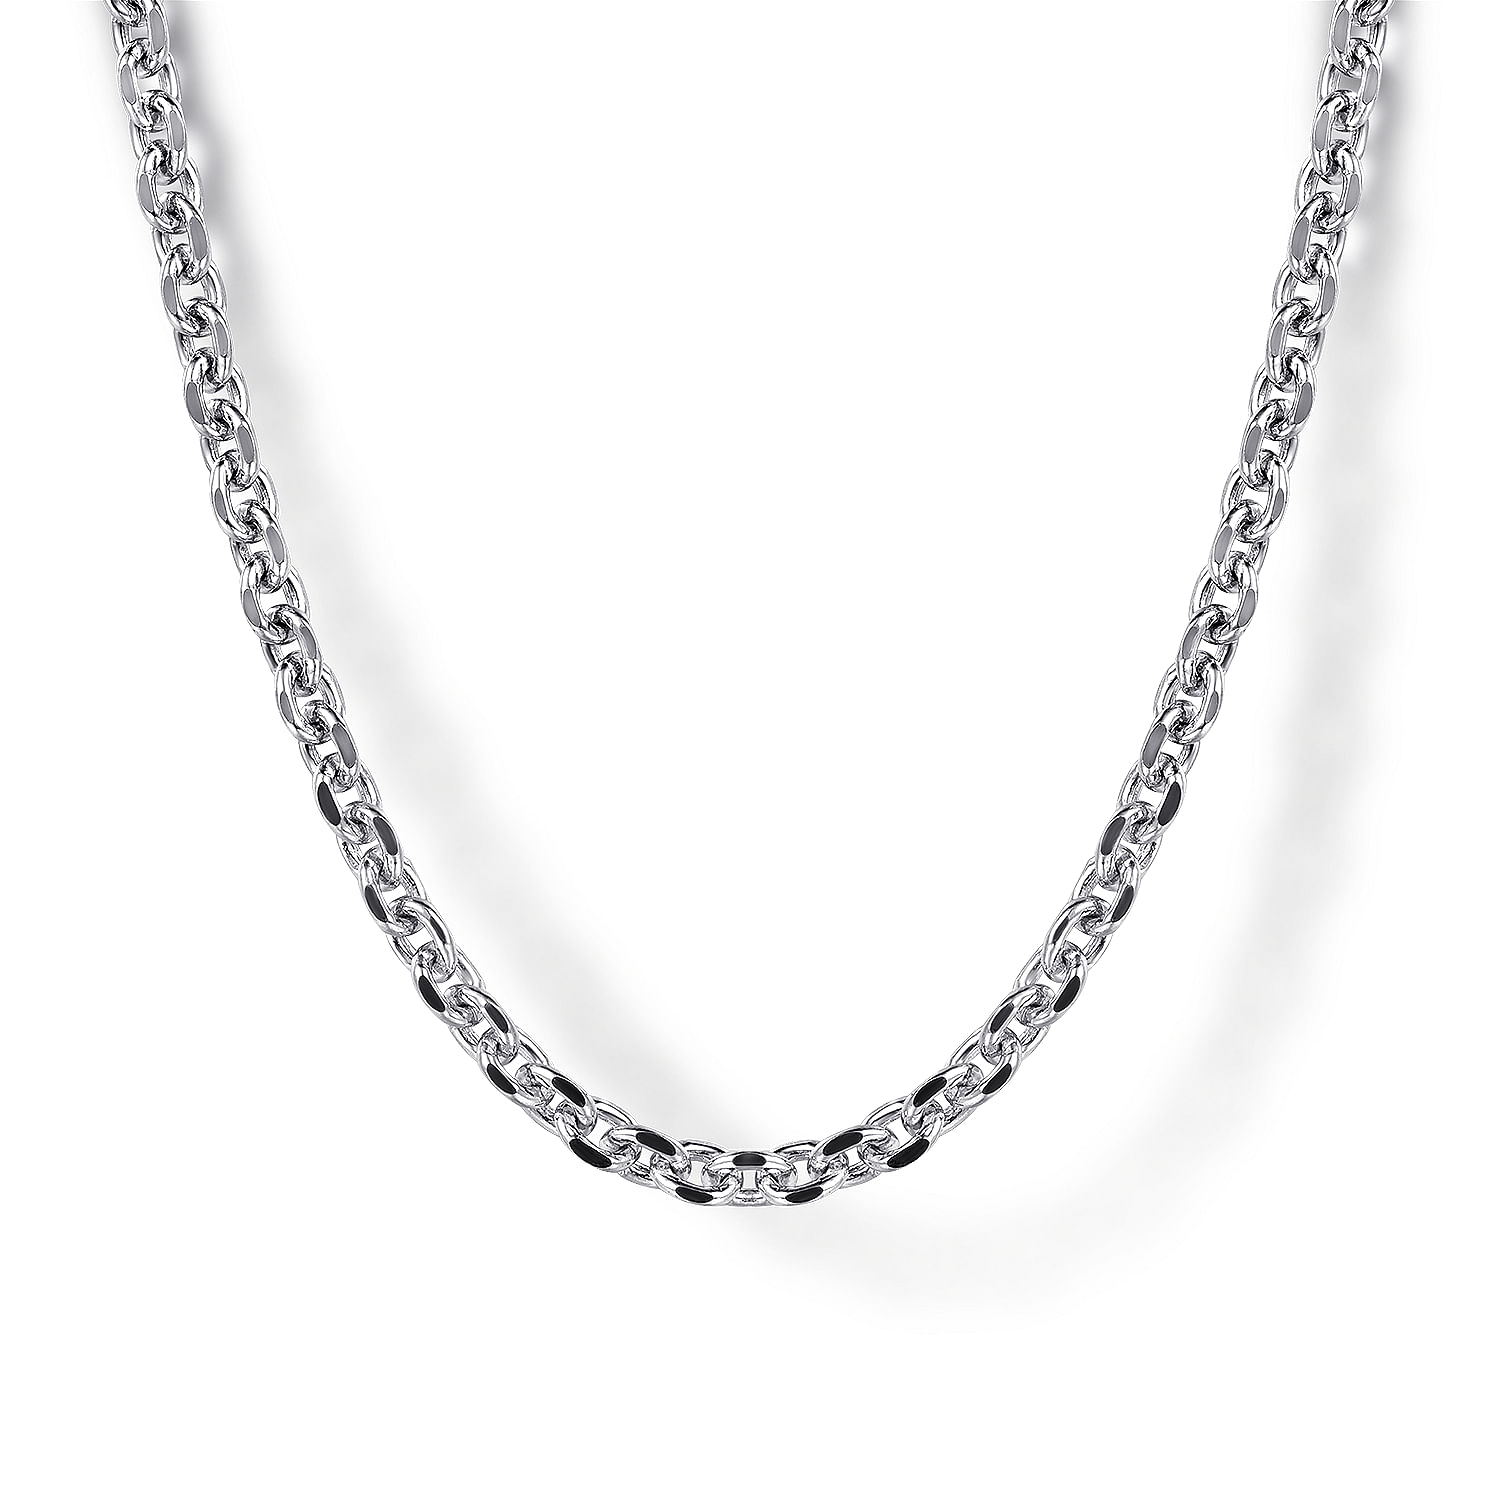 Gabriel - 22 Inch 925 Sterling Silver Men's Link Chain Necklace